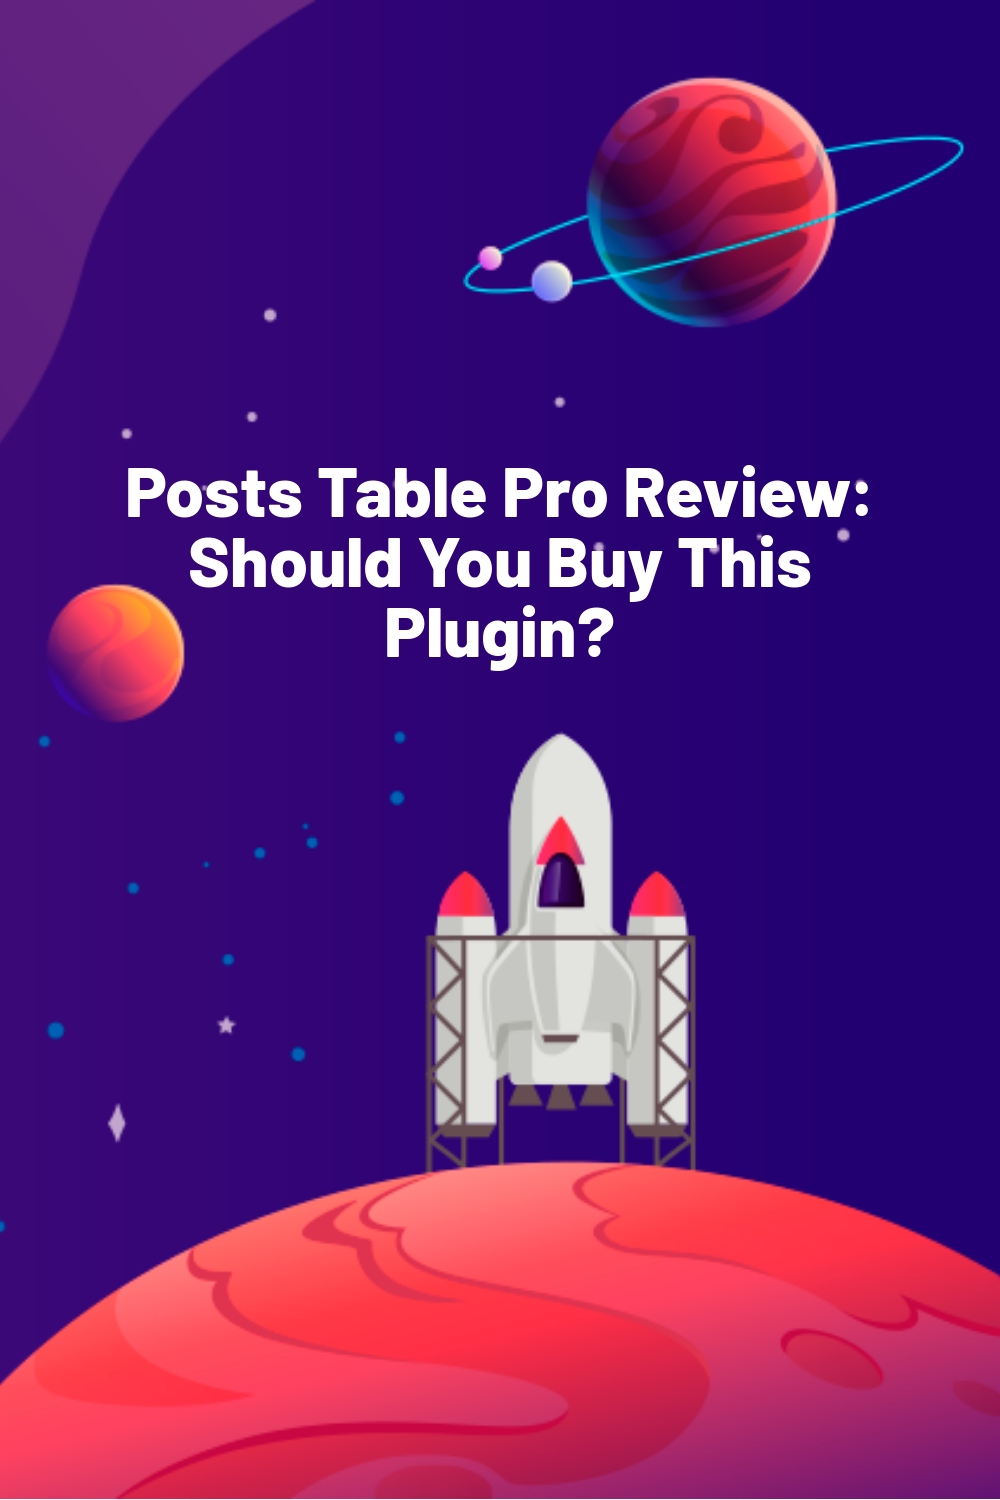 Posts Table Pro Review: Should You Buy This Plugin?